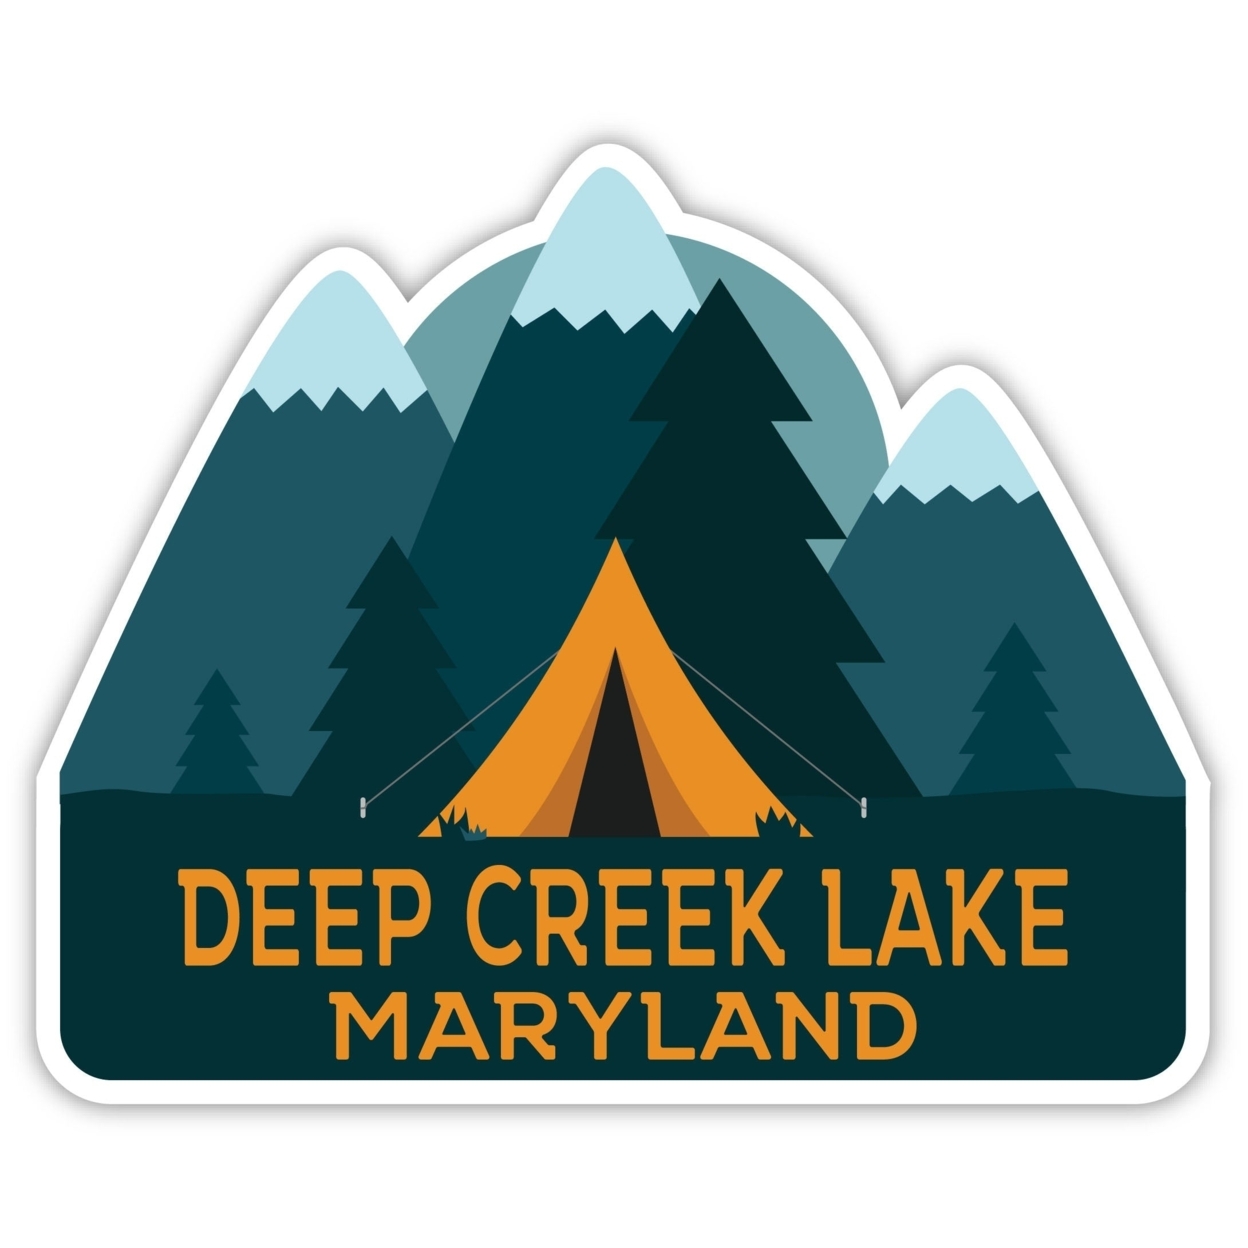 Deep Creek Lake Maryland Souvenir Decorative Stickers (Choose Theme And Size) - 4-Pack, 6-Inch, Tent